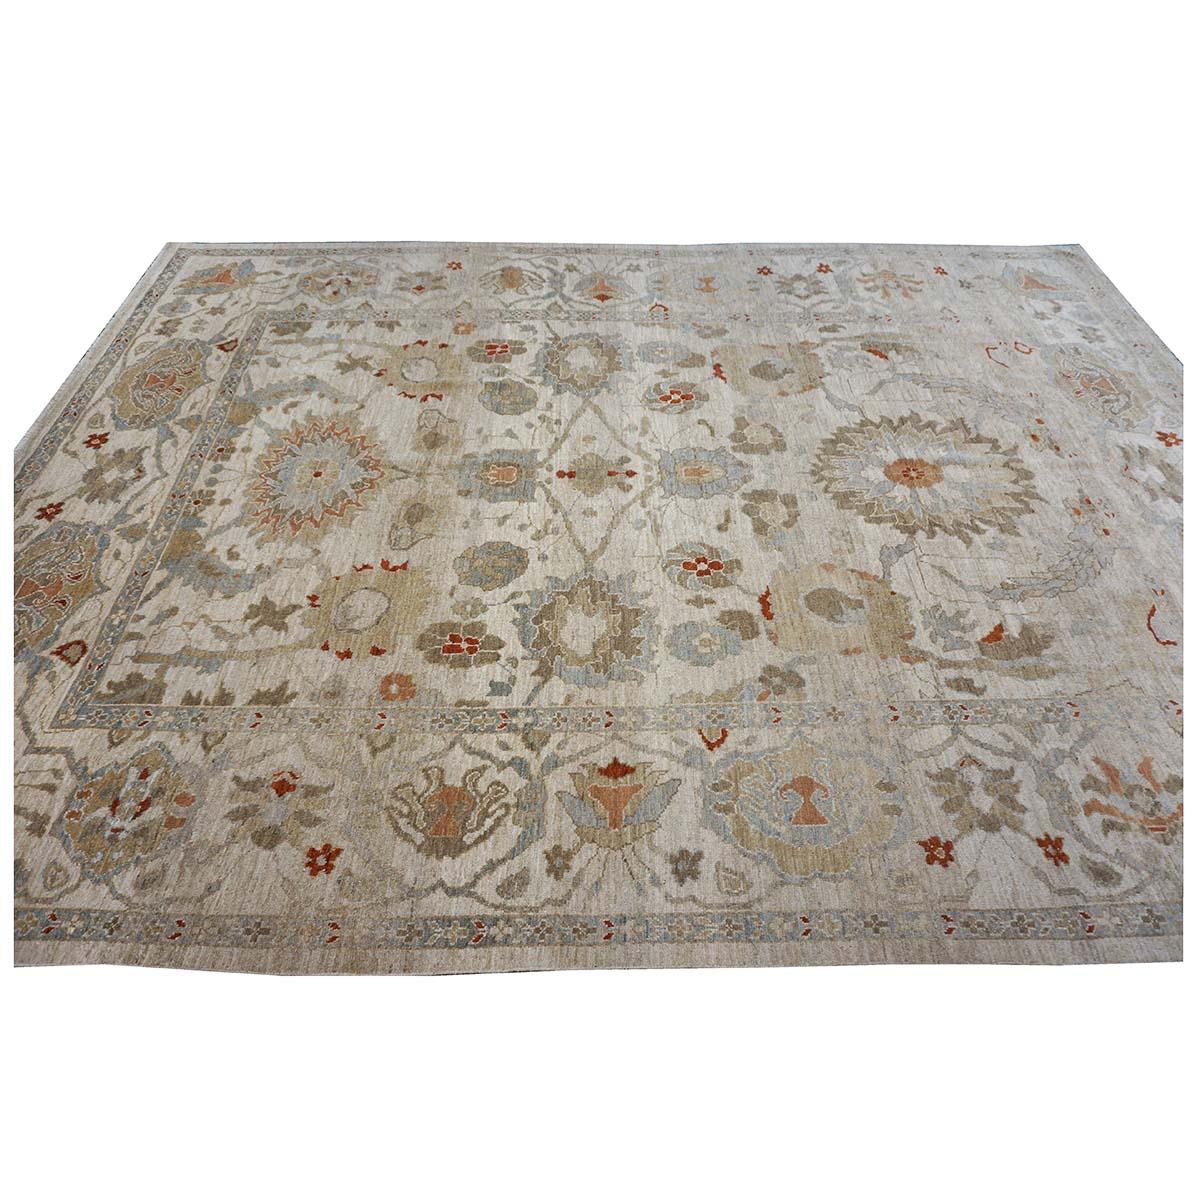 21st Century Persian Sultanabad 9x12 Ivory, Blue & Tan Handmade Area Rug In Excellent Condition For Sale In Houston, TX